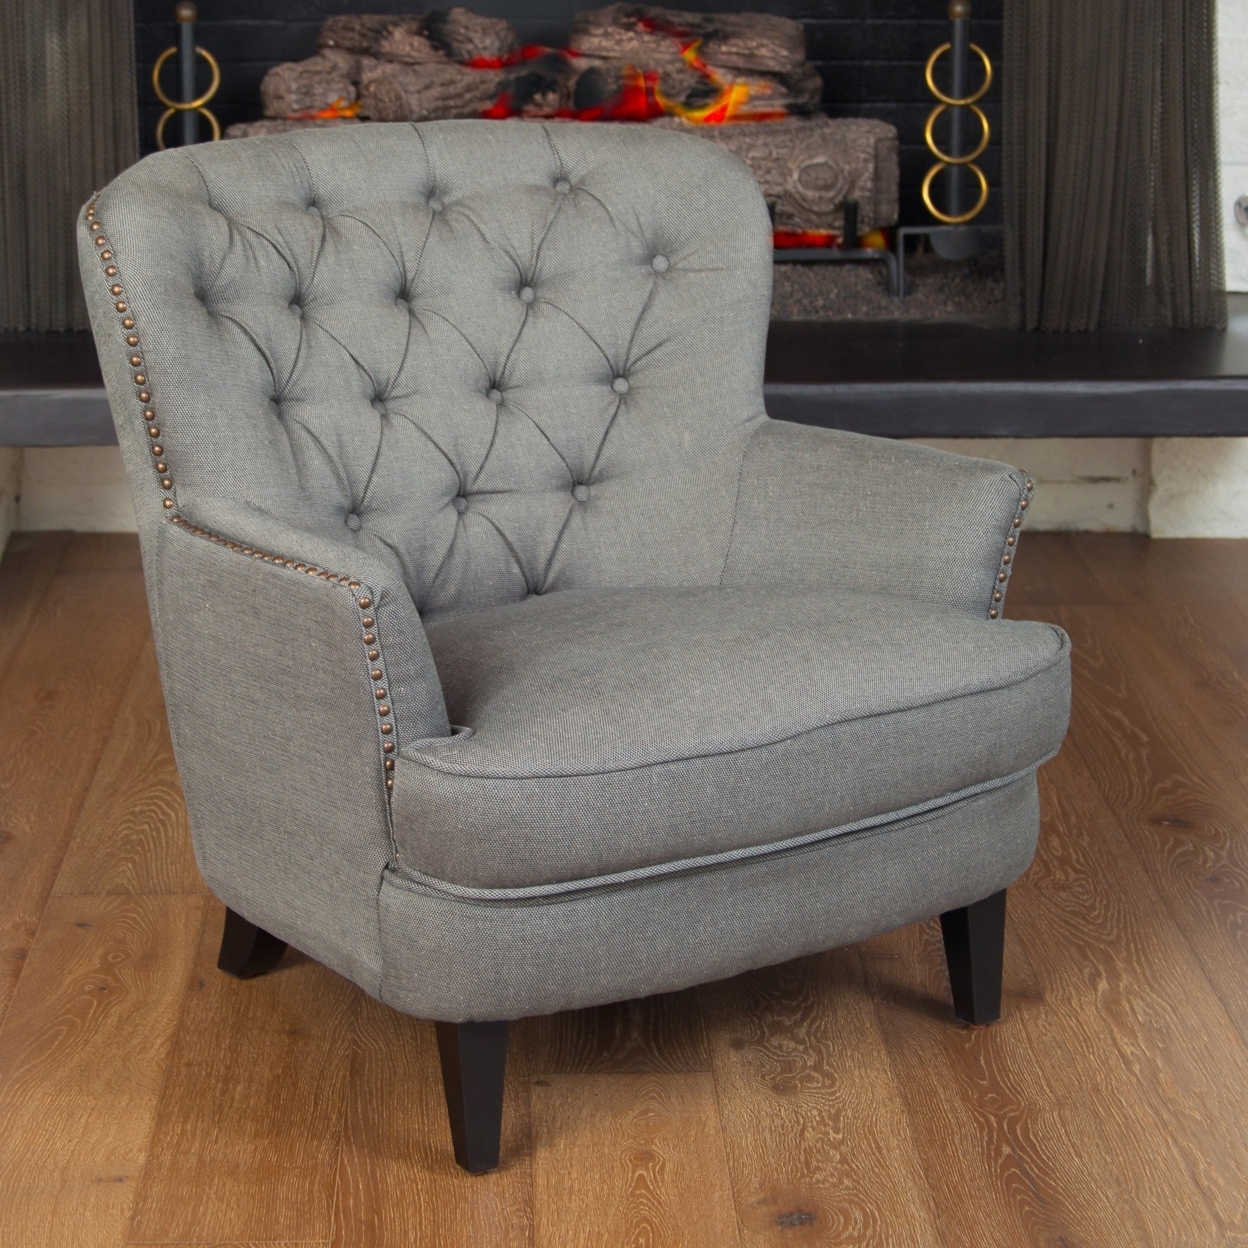 Laxford Upholstered Club Chair - Gray, Fabric